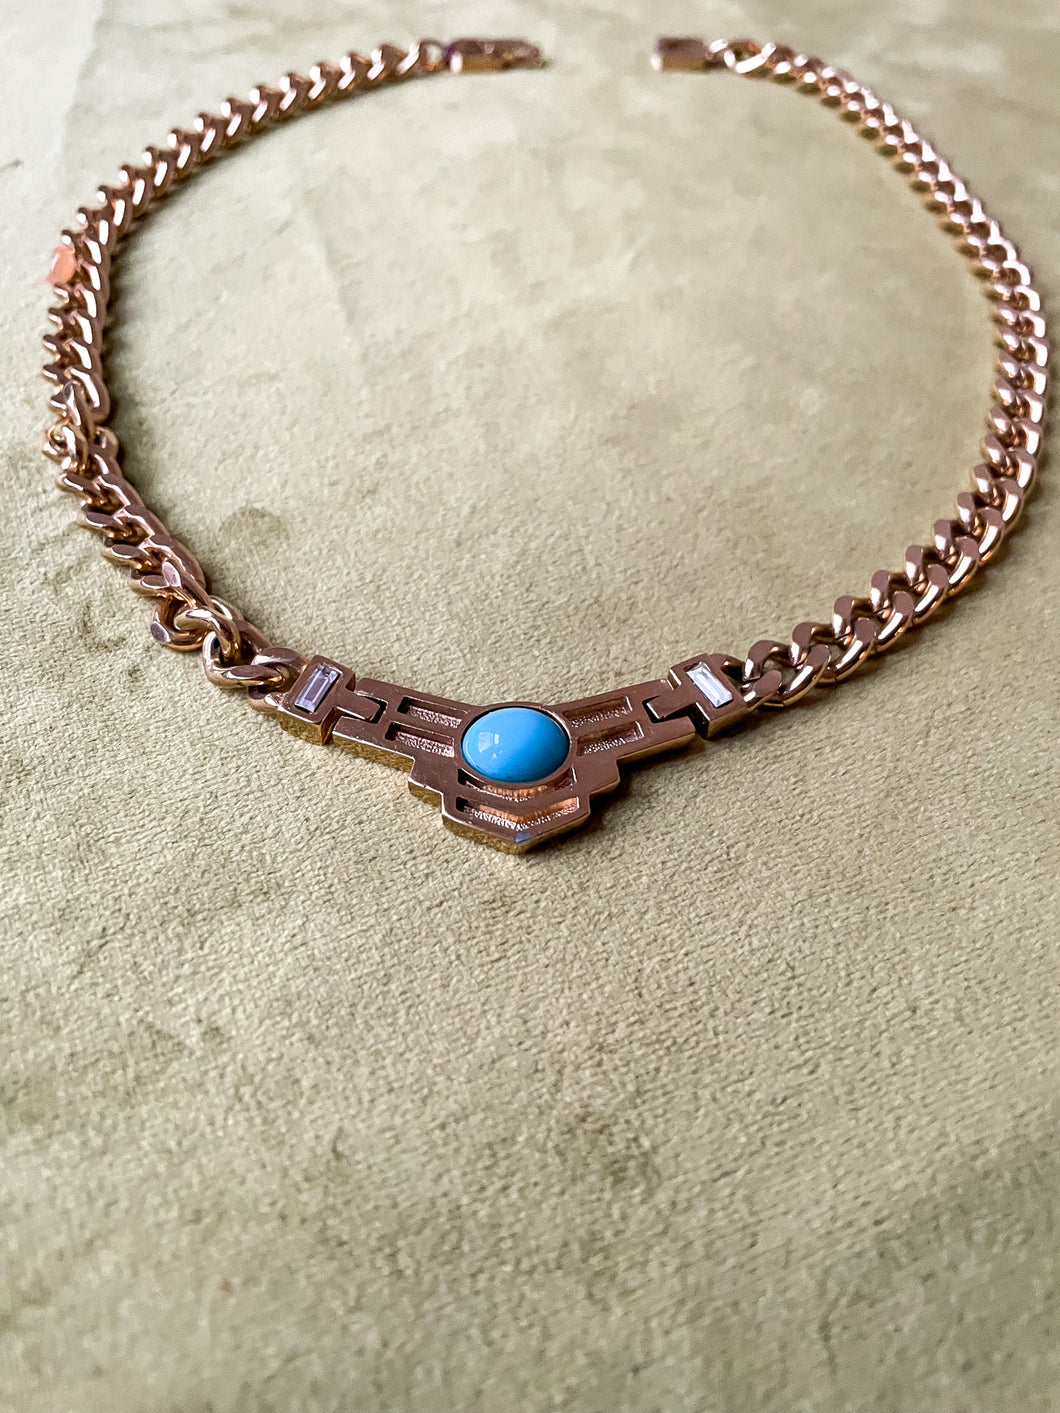 g1venchy necklace with turquoise